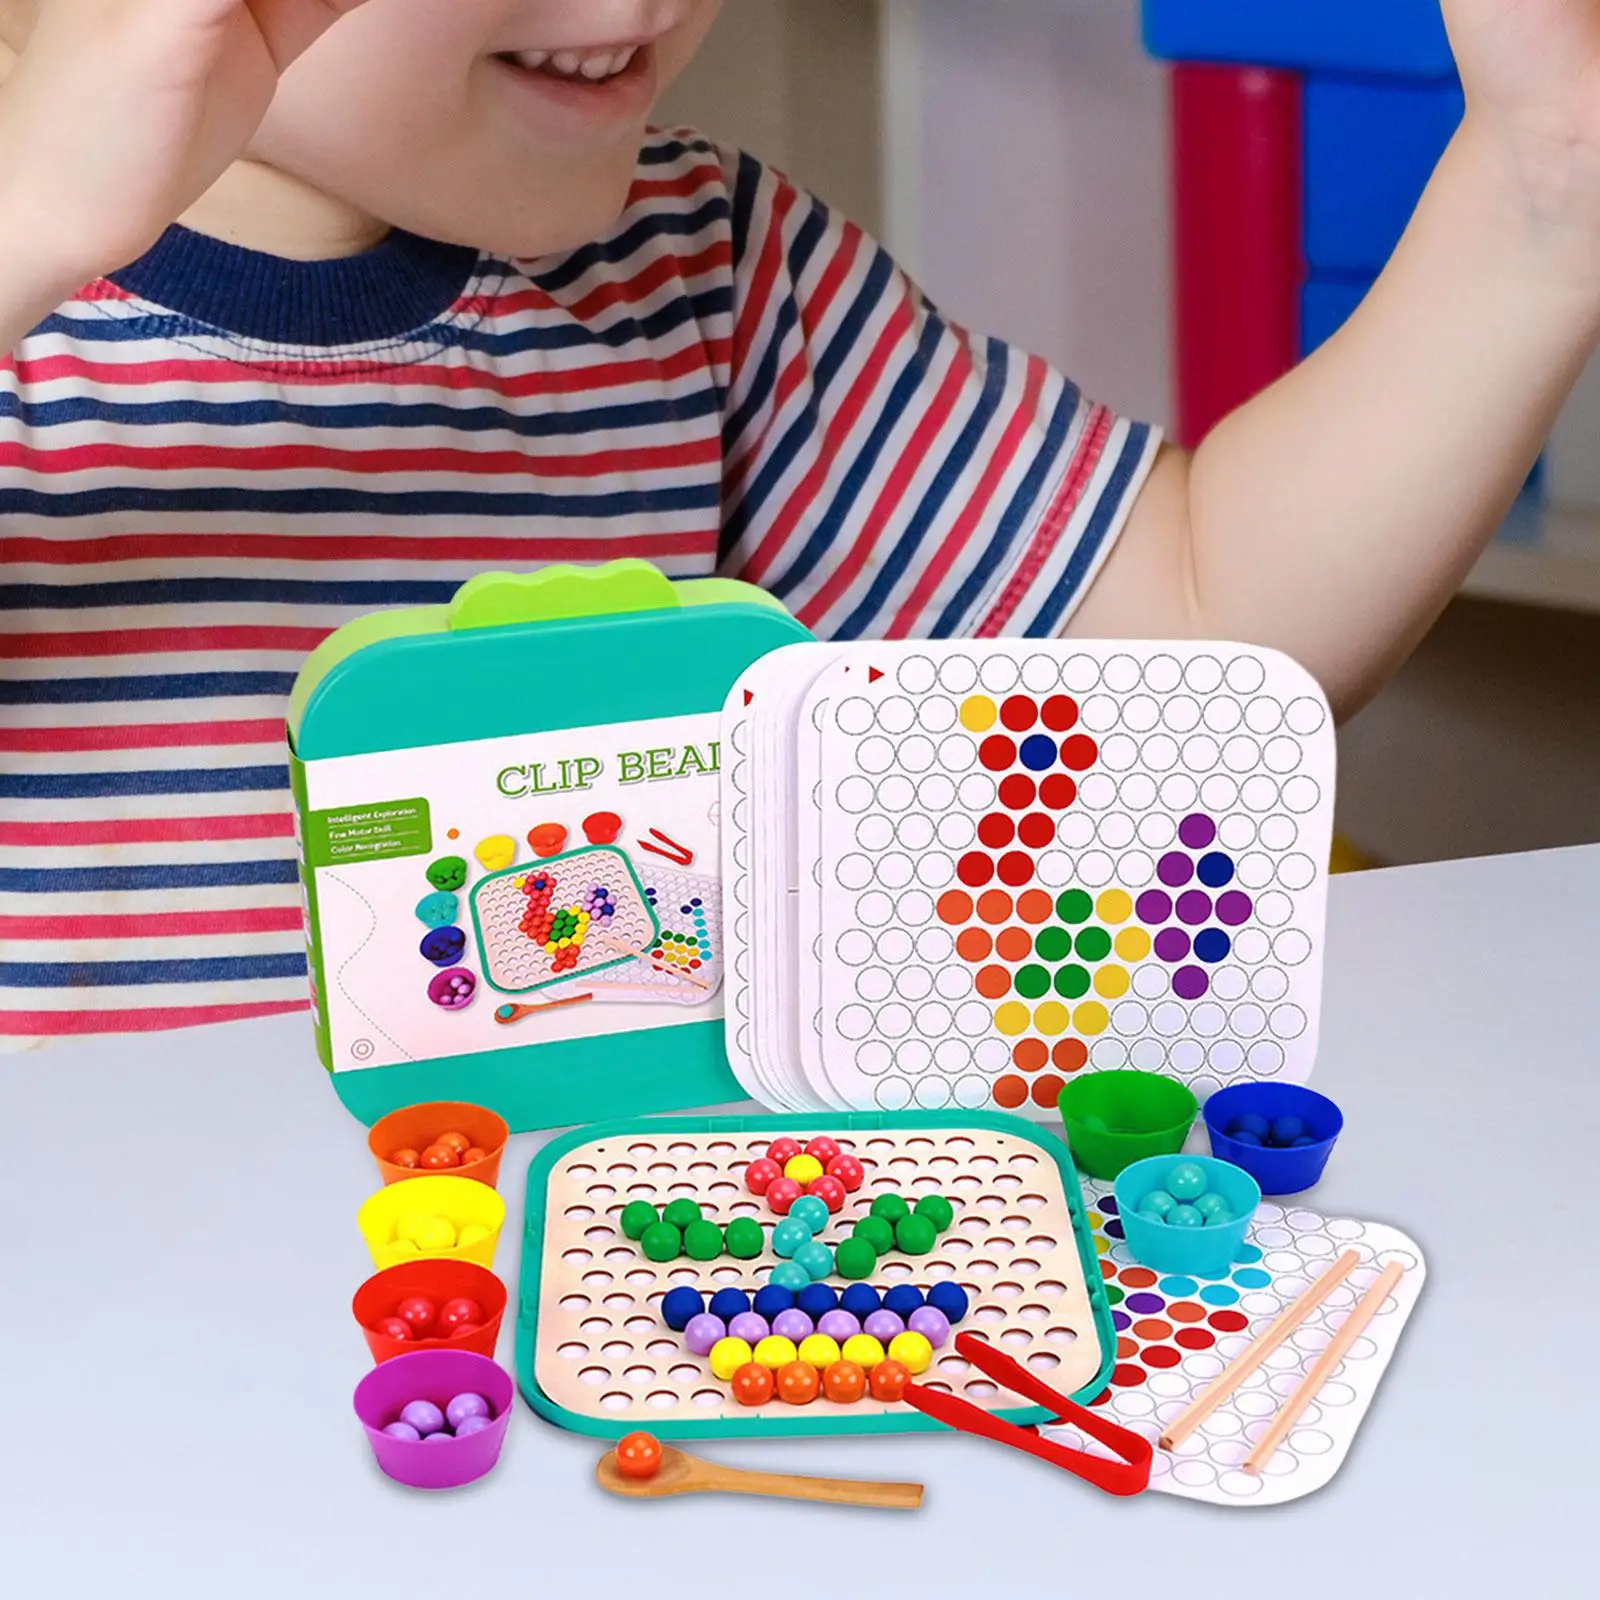 Wooden Peg Board Beads Game Educational Bead Clipping Toy Clip Bead Game for Primary Activity Interaction Preschool Kindergarten